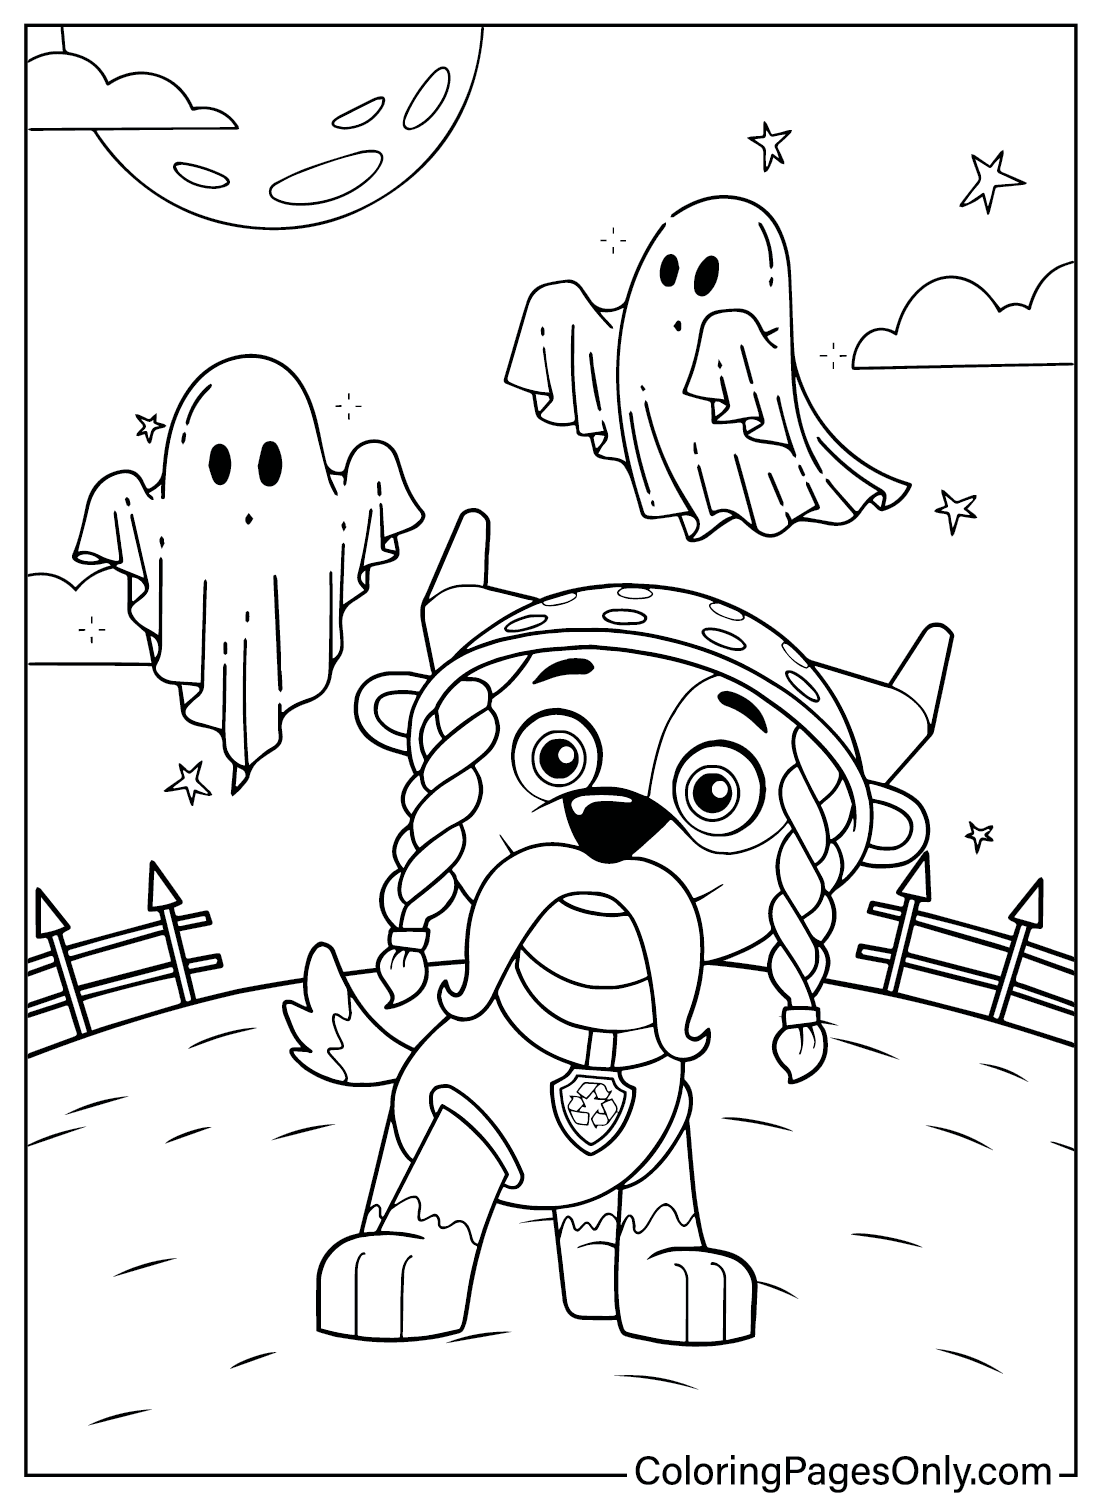 Paw Patrol Halloween Coloring Page Free from Paw Patrol Halloween